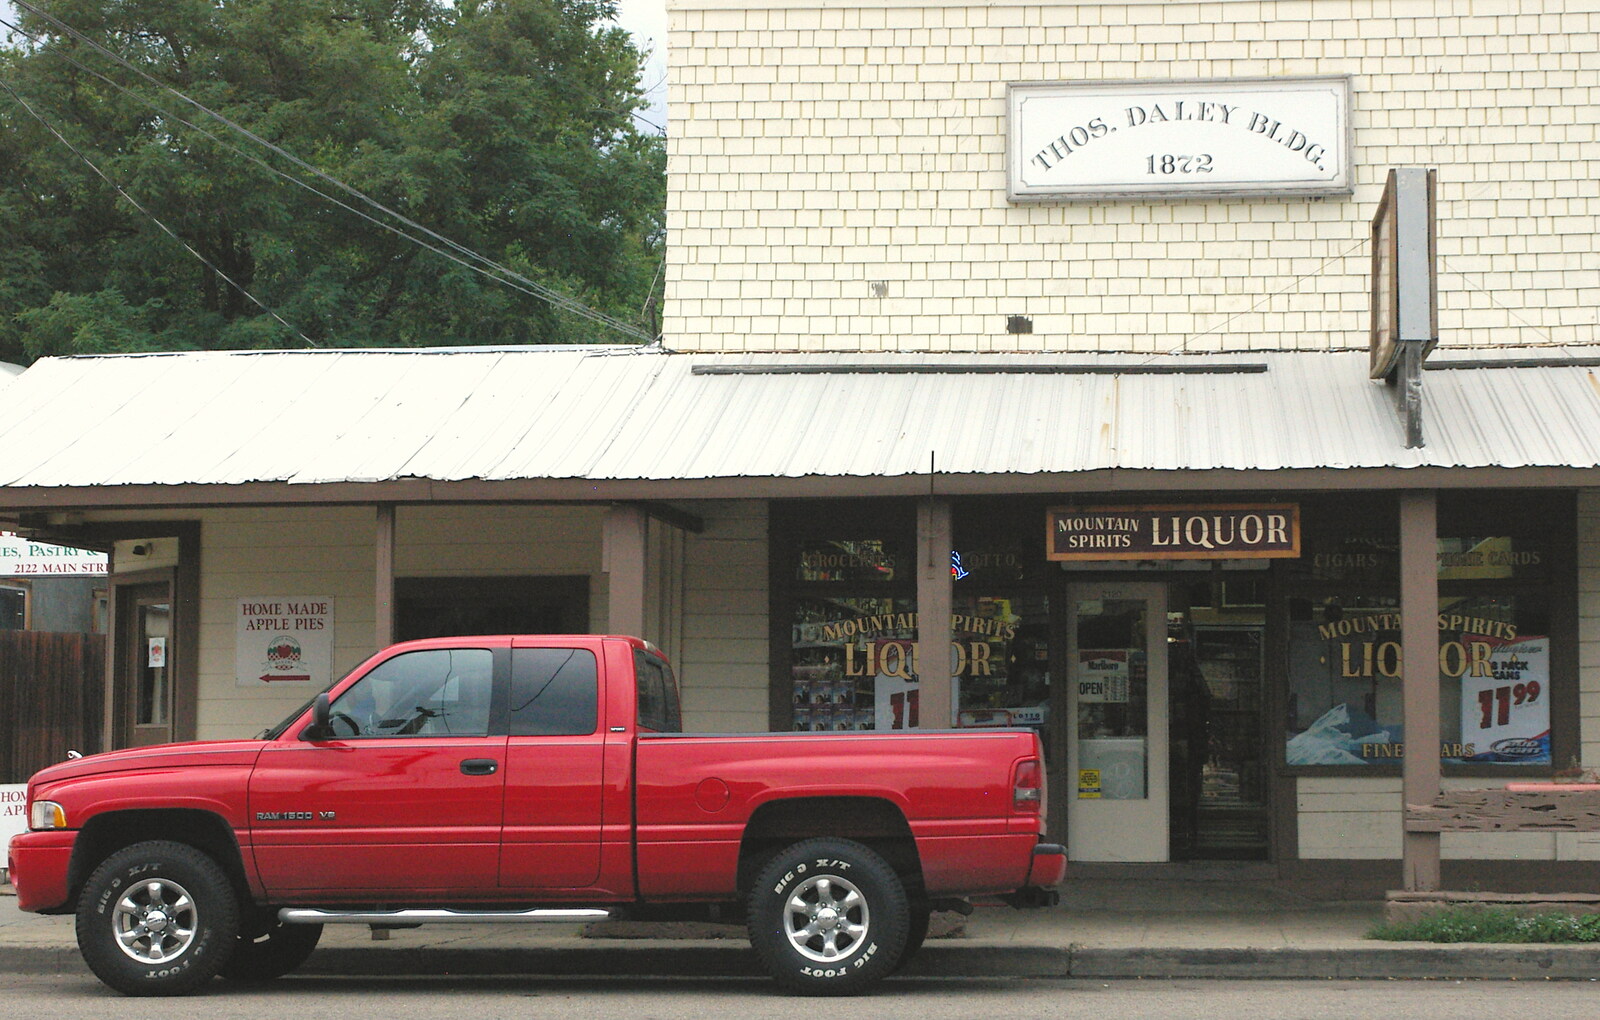 A small-town liquor store from Route 78: A Drive Around the San Diego Mountains, California, US - 9th August 2005